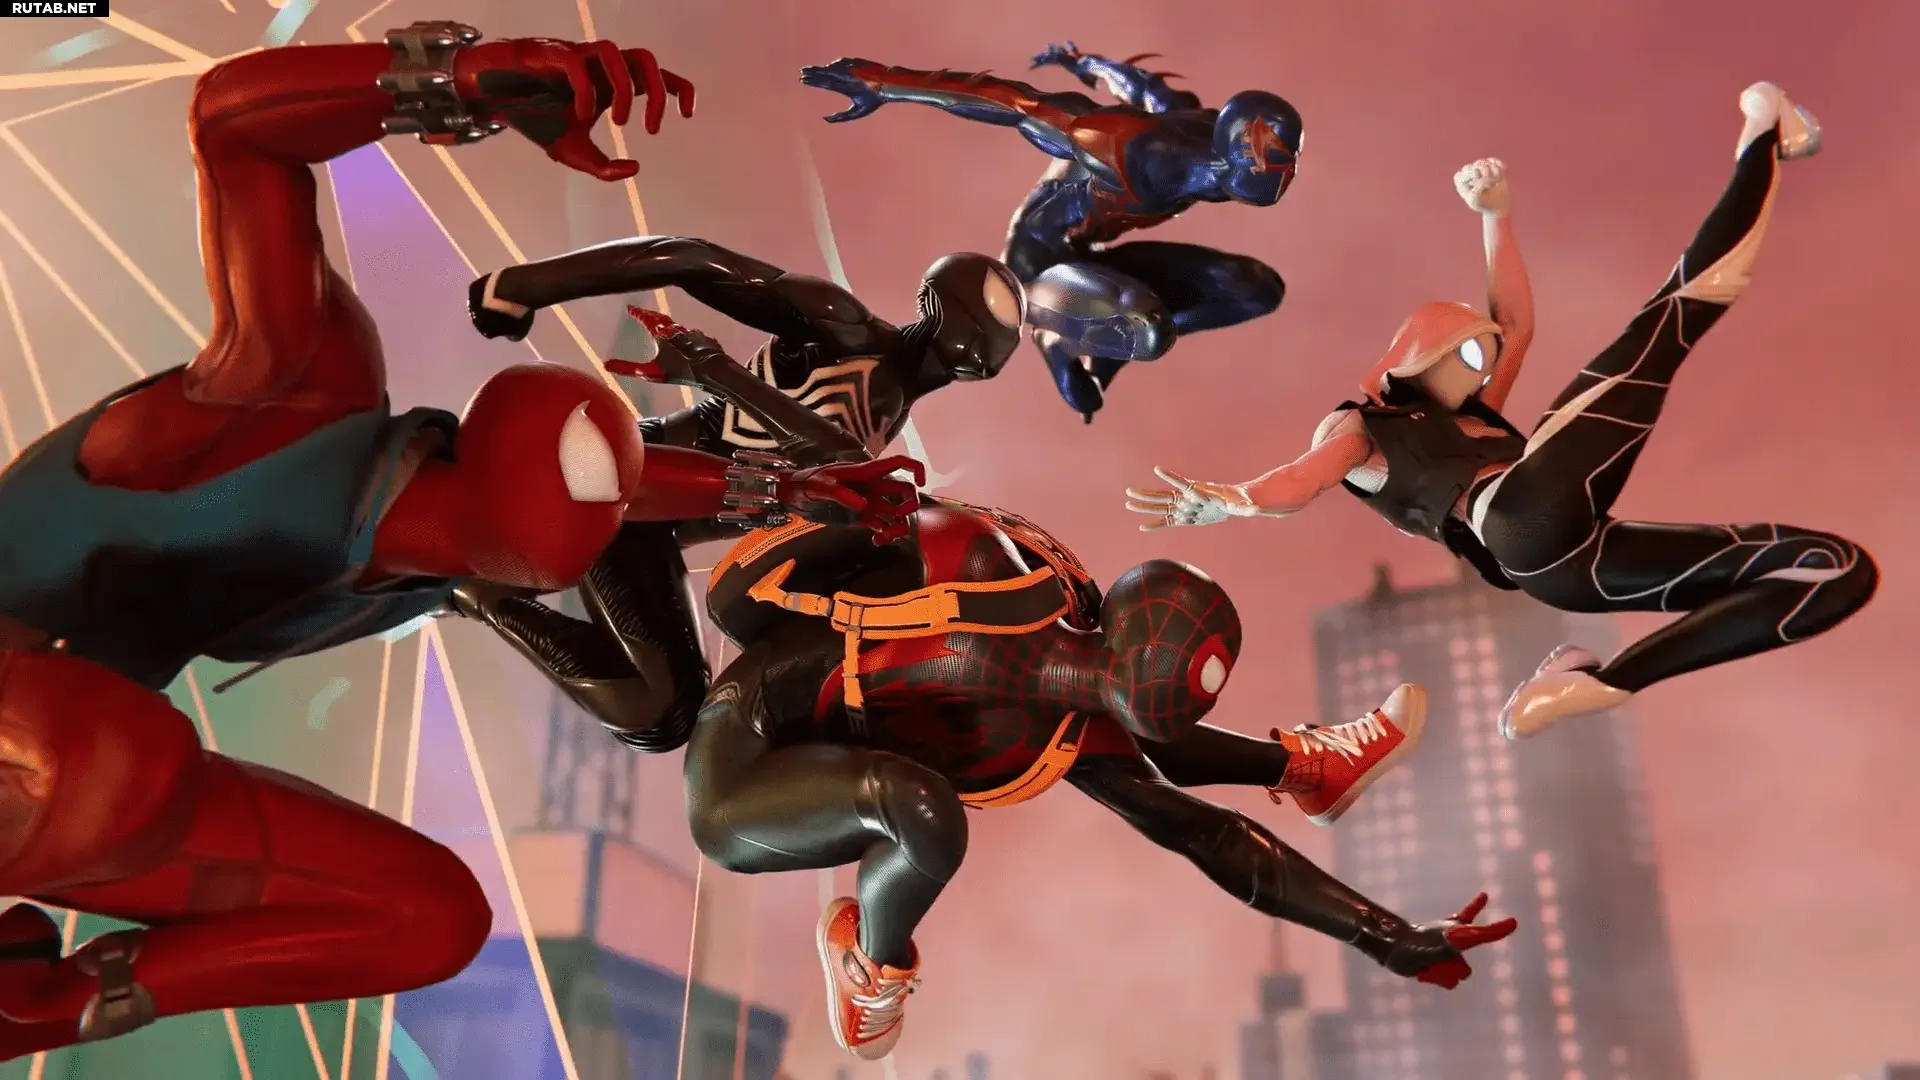 The second trailer for the canceled Spider-Man: The Great Web from Insomniac Games has leaked online.